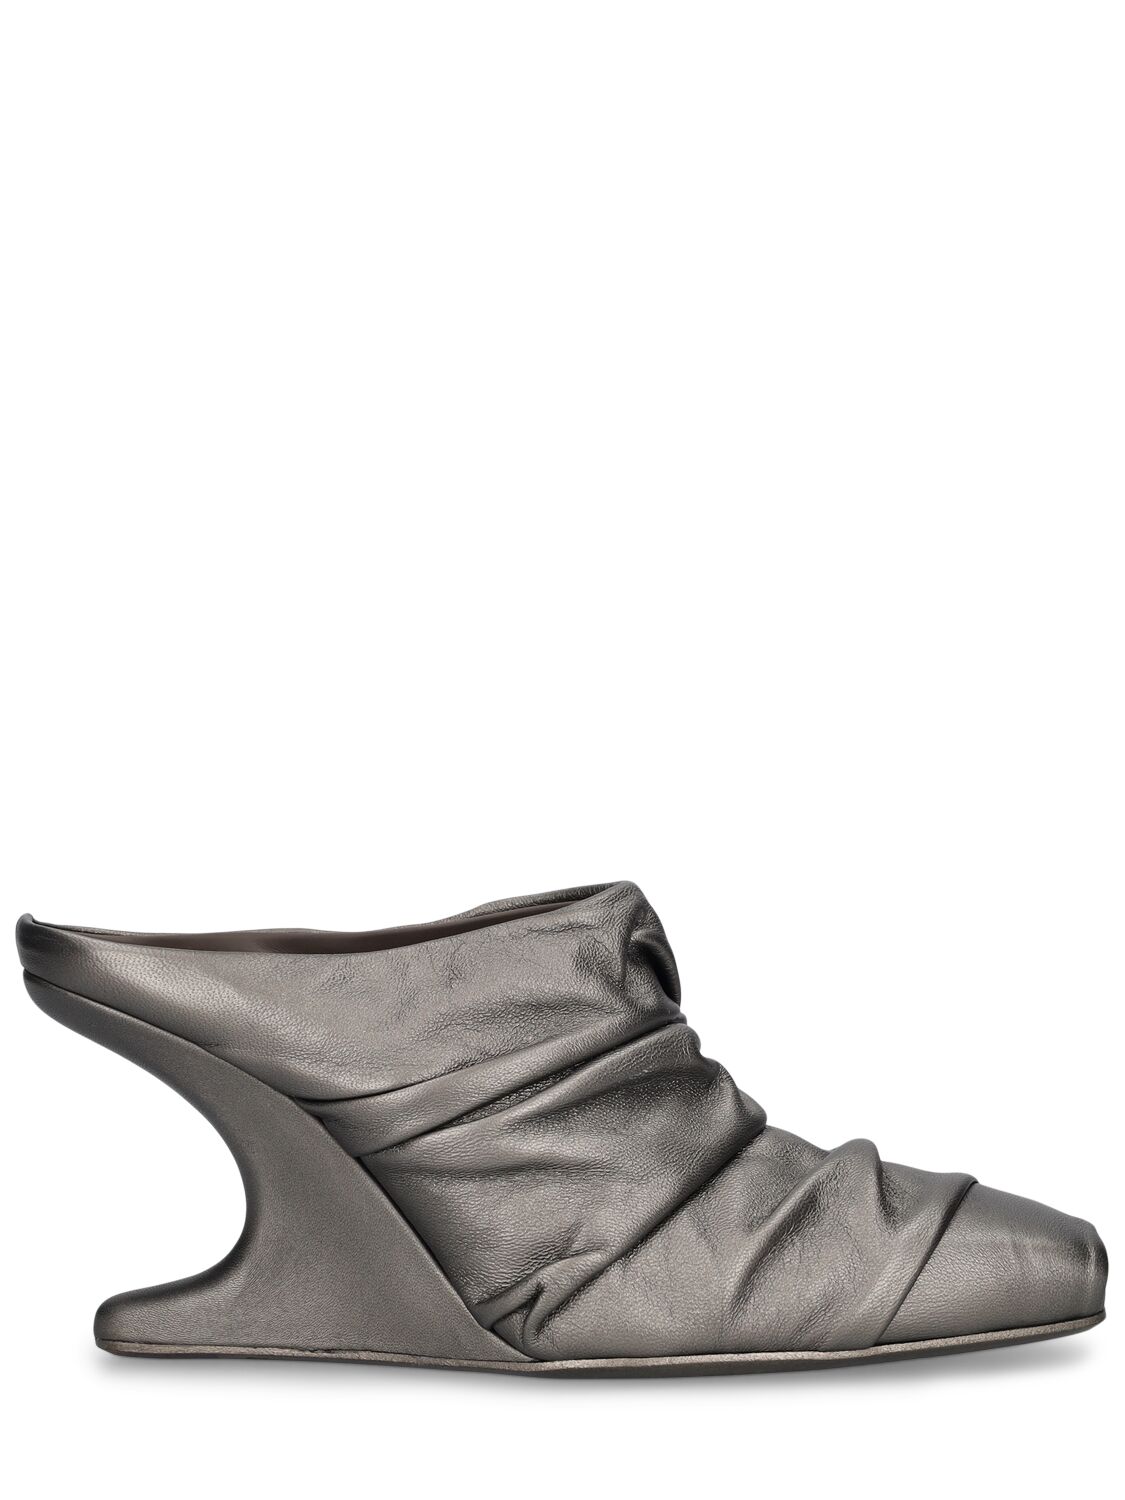 Rick Owens 80mm Cantilever Leather Mules In Multi